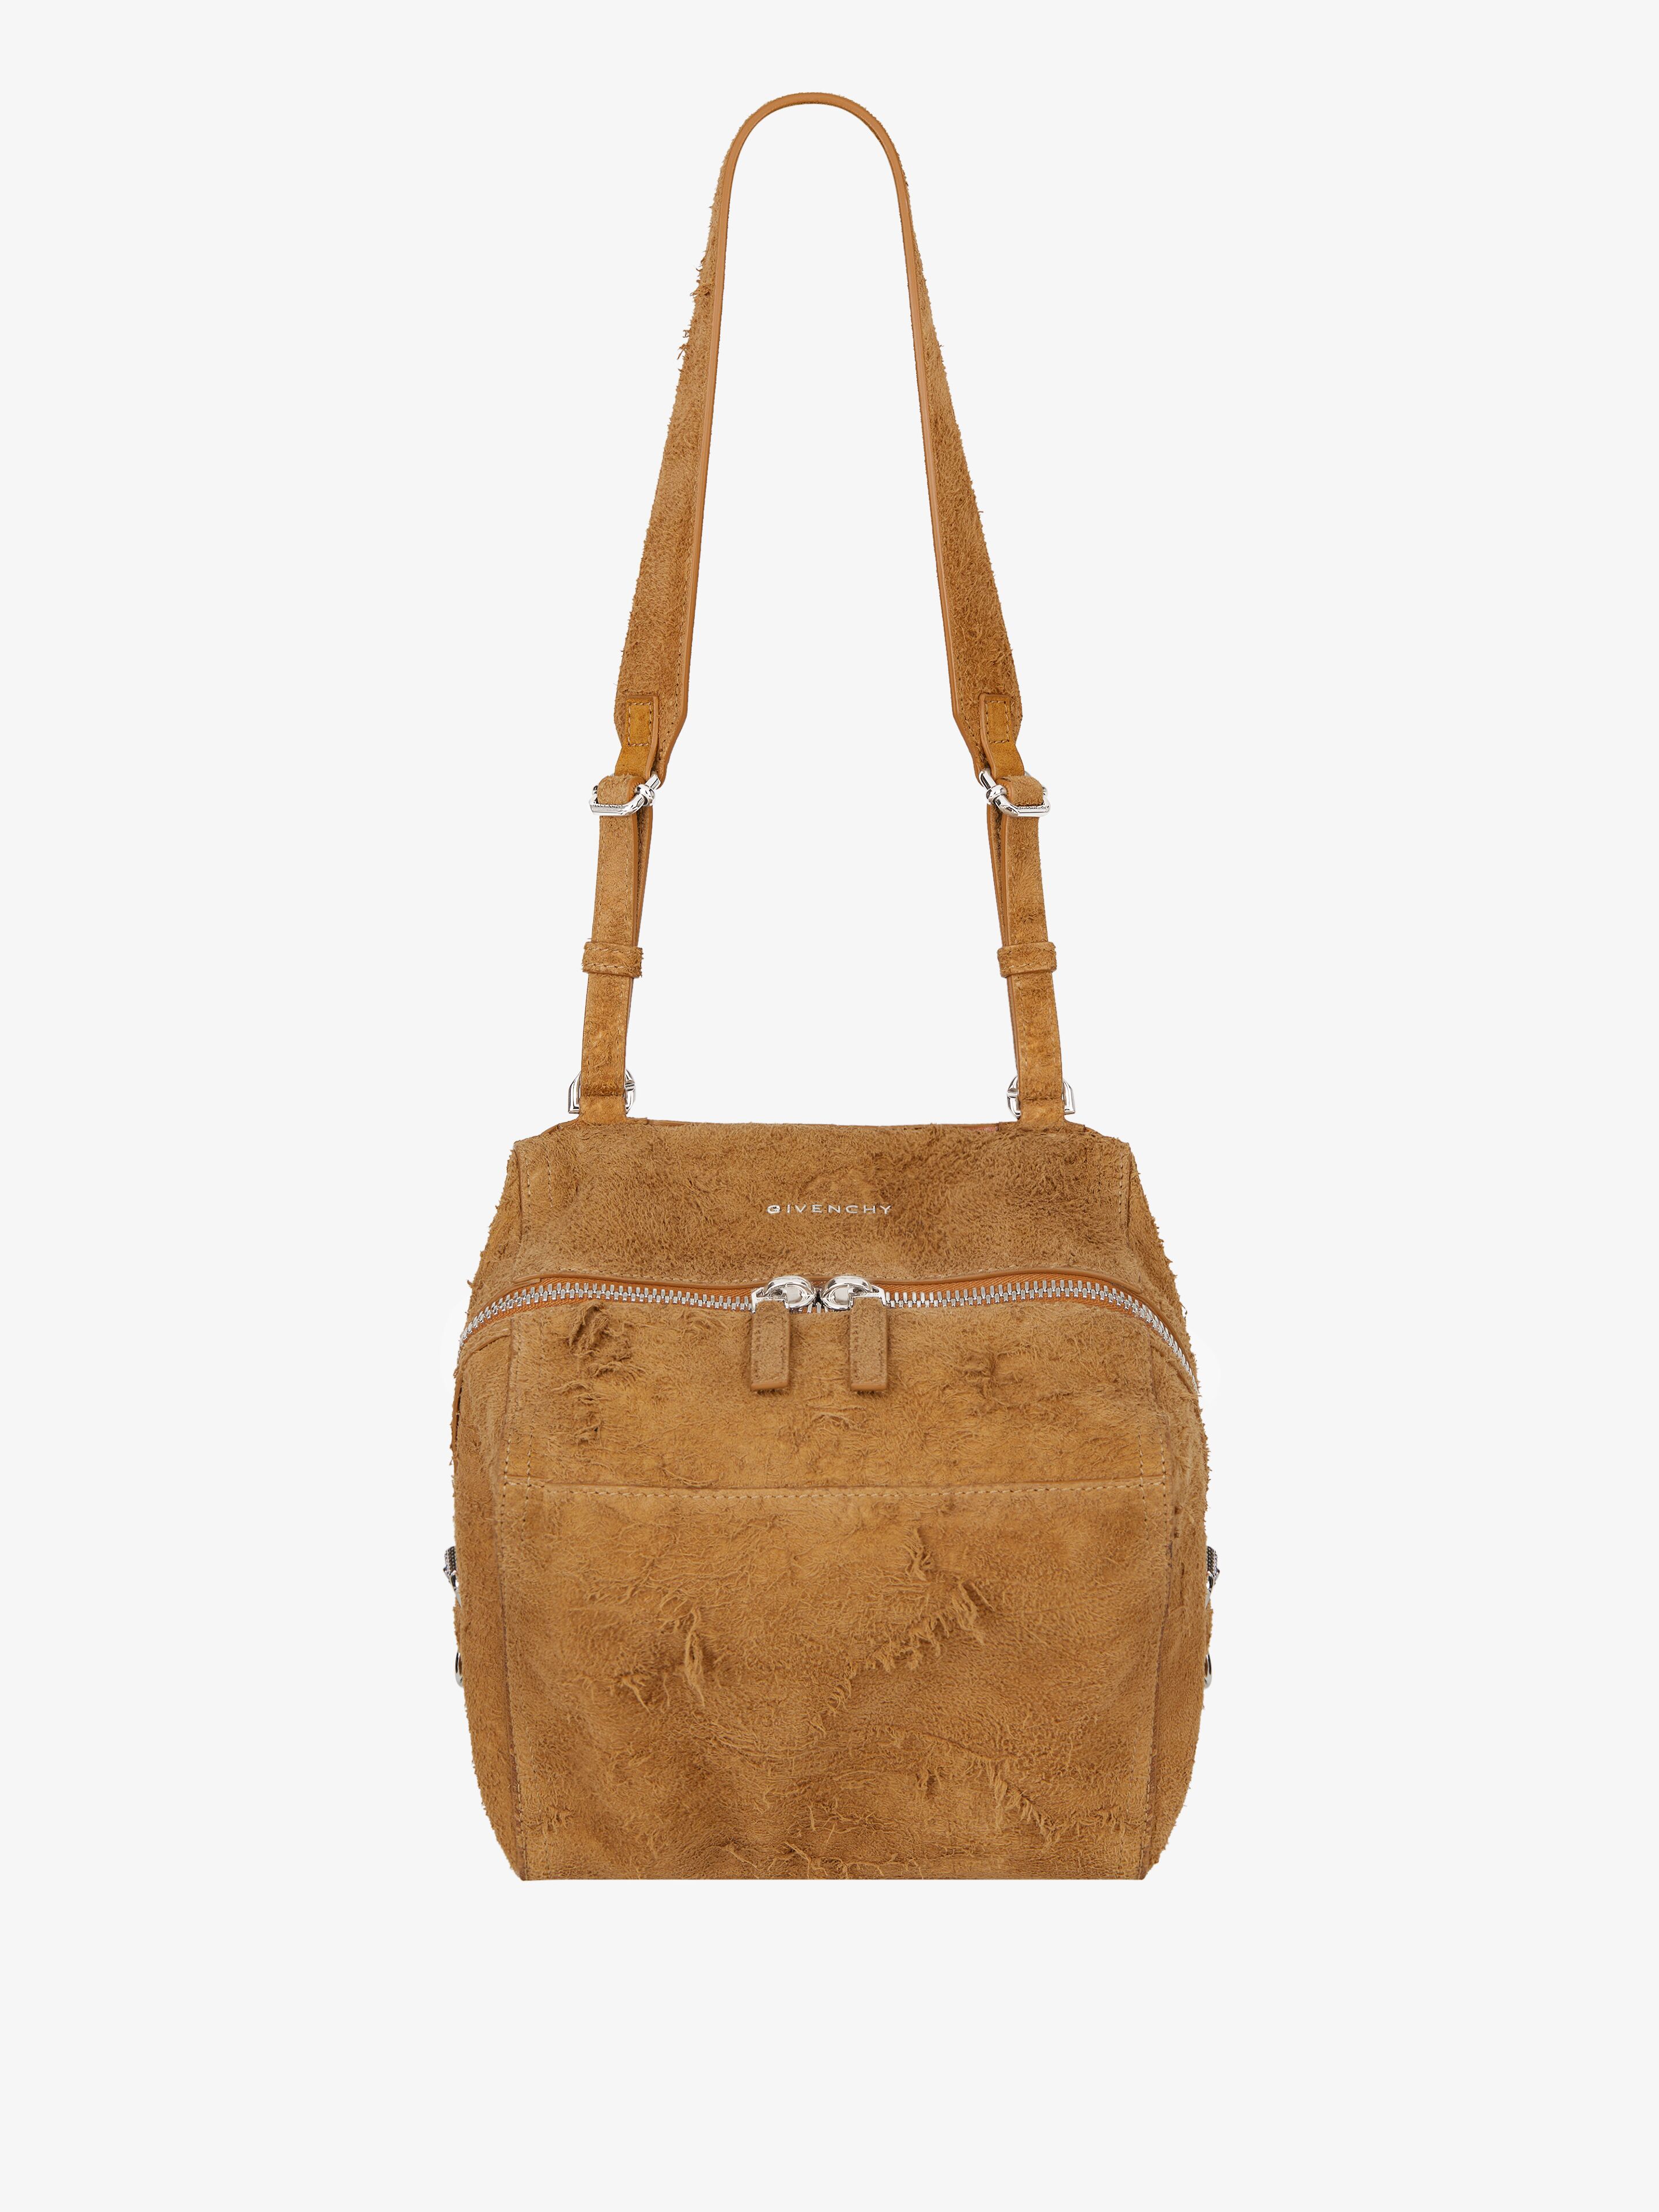 GIVENCHY SMALL PANDORA BAG IN SUEDE LEATHER